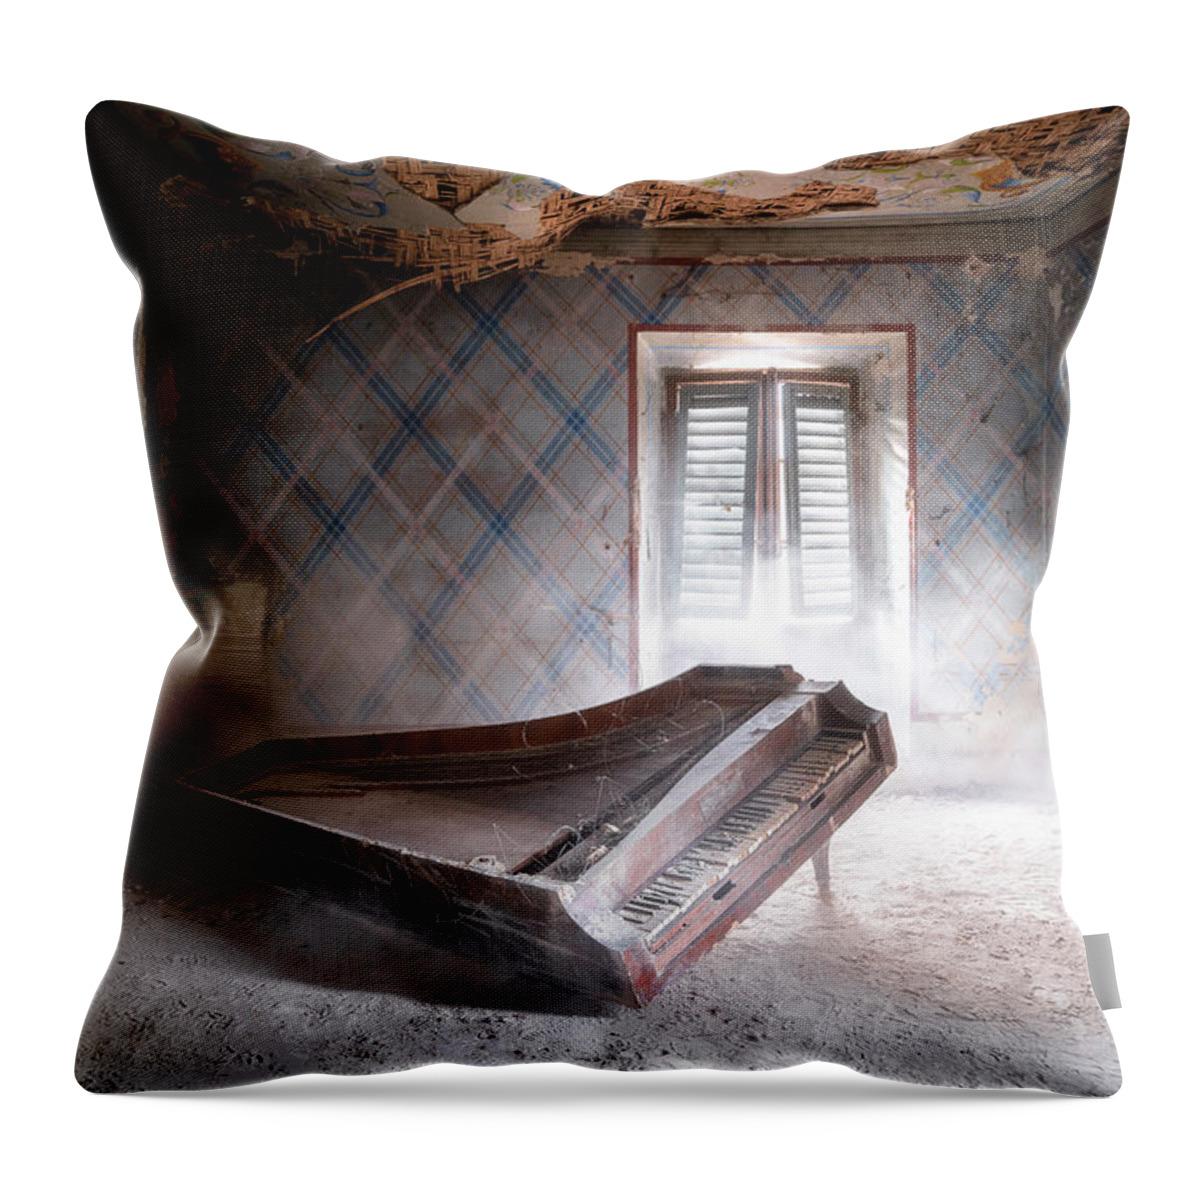 Abandoned Throw Pillow featuring the photograph Piano on the Floor by Roman Robroek